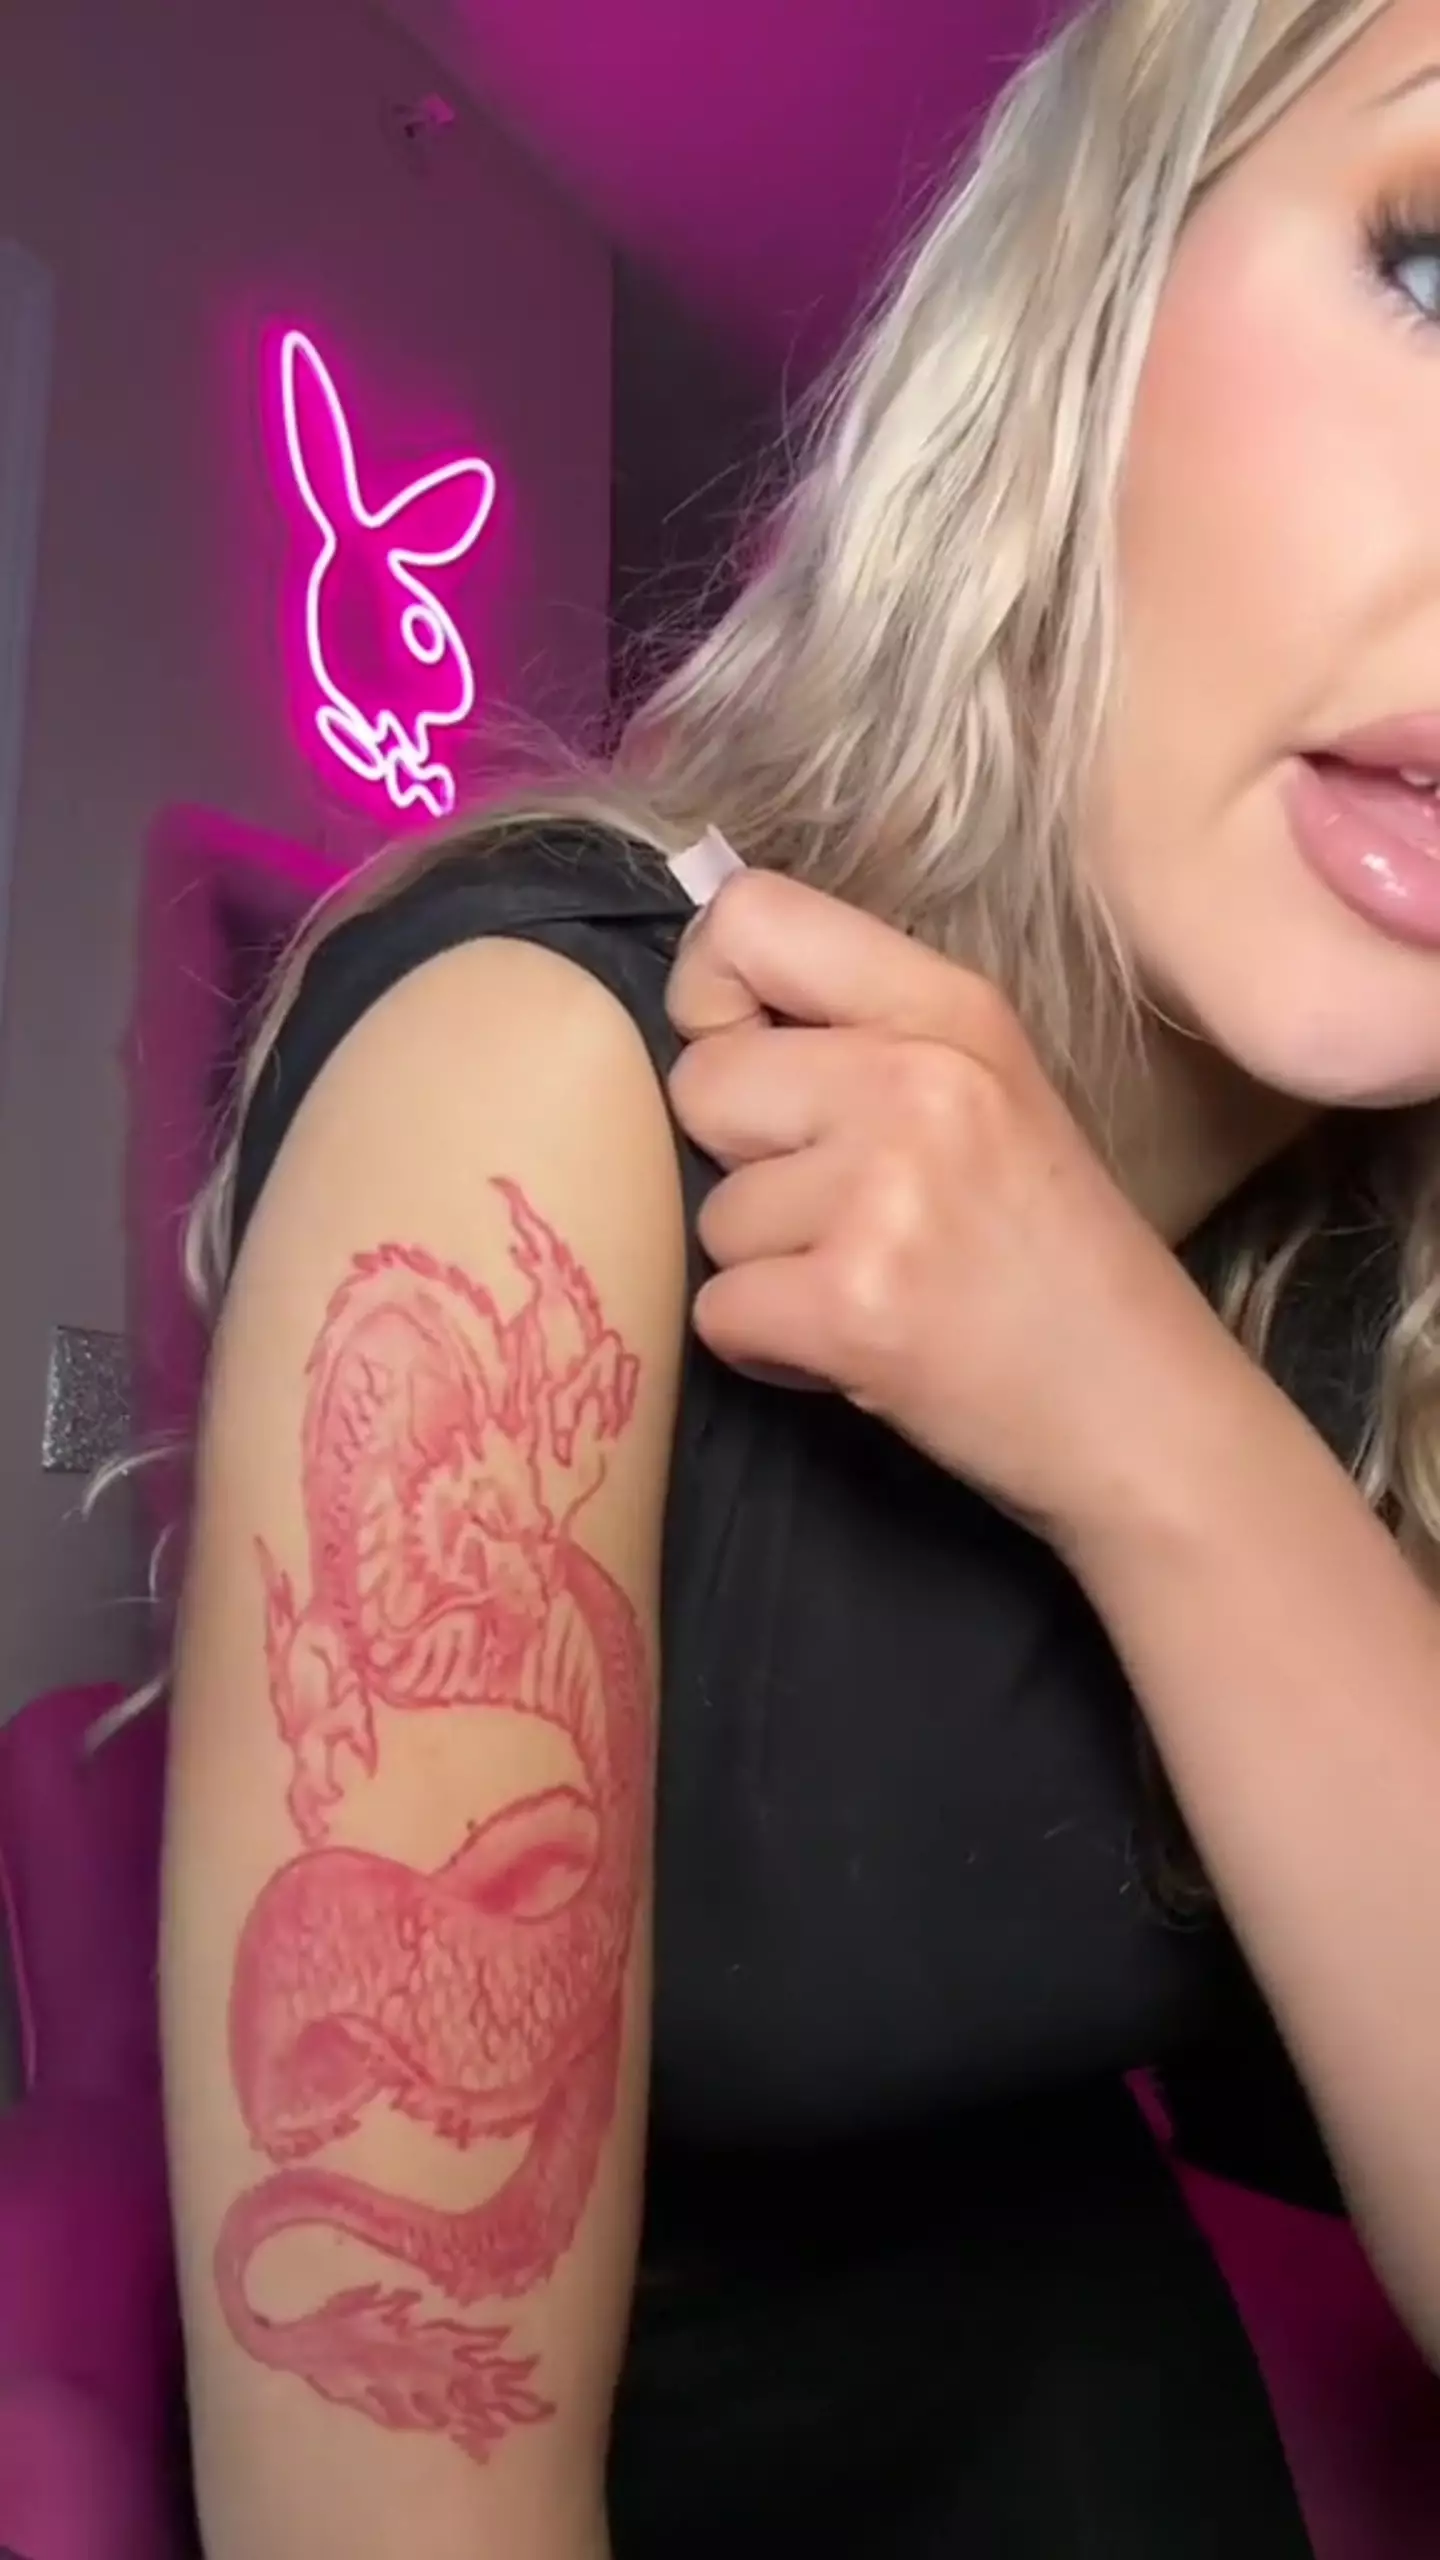 The influencer took to TikTok to explain why she wants some of her tattoos removed.